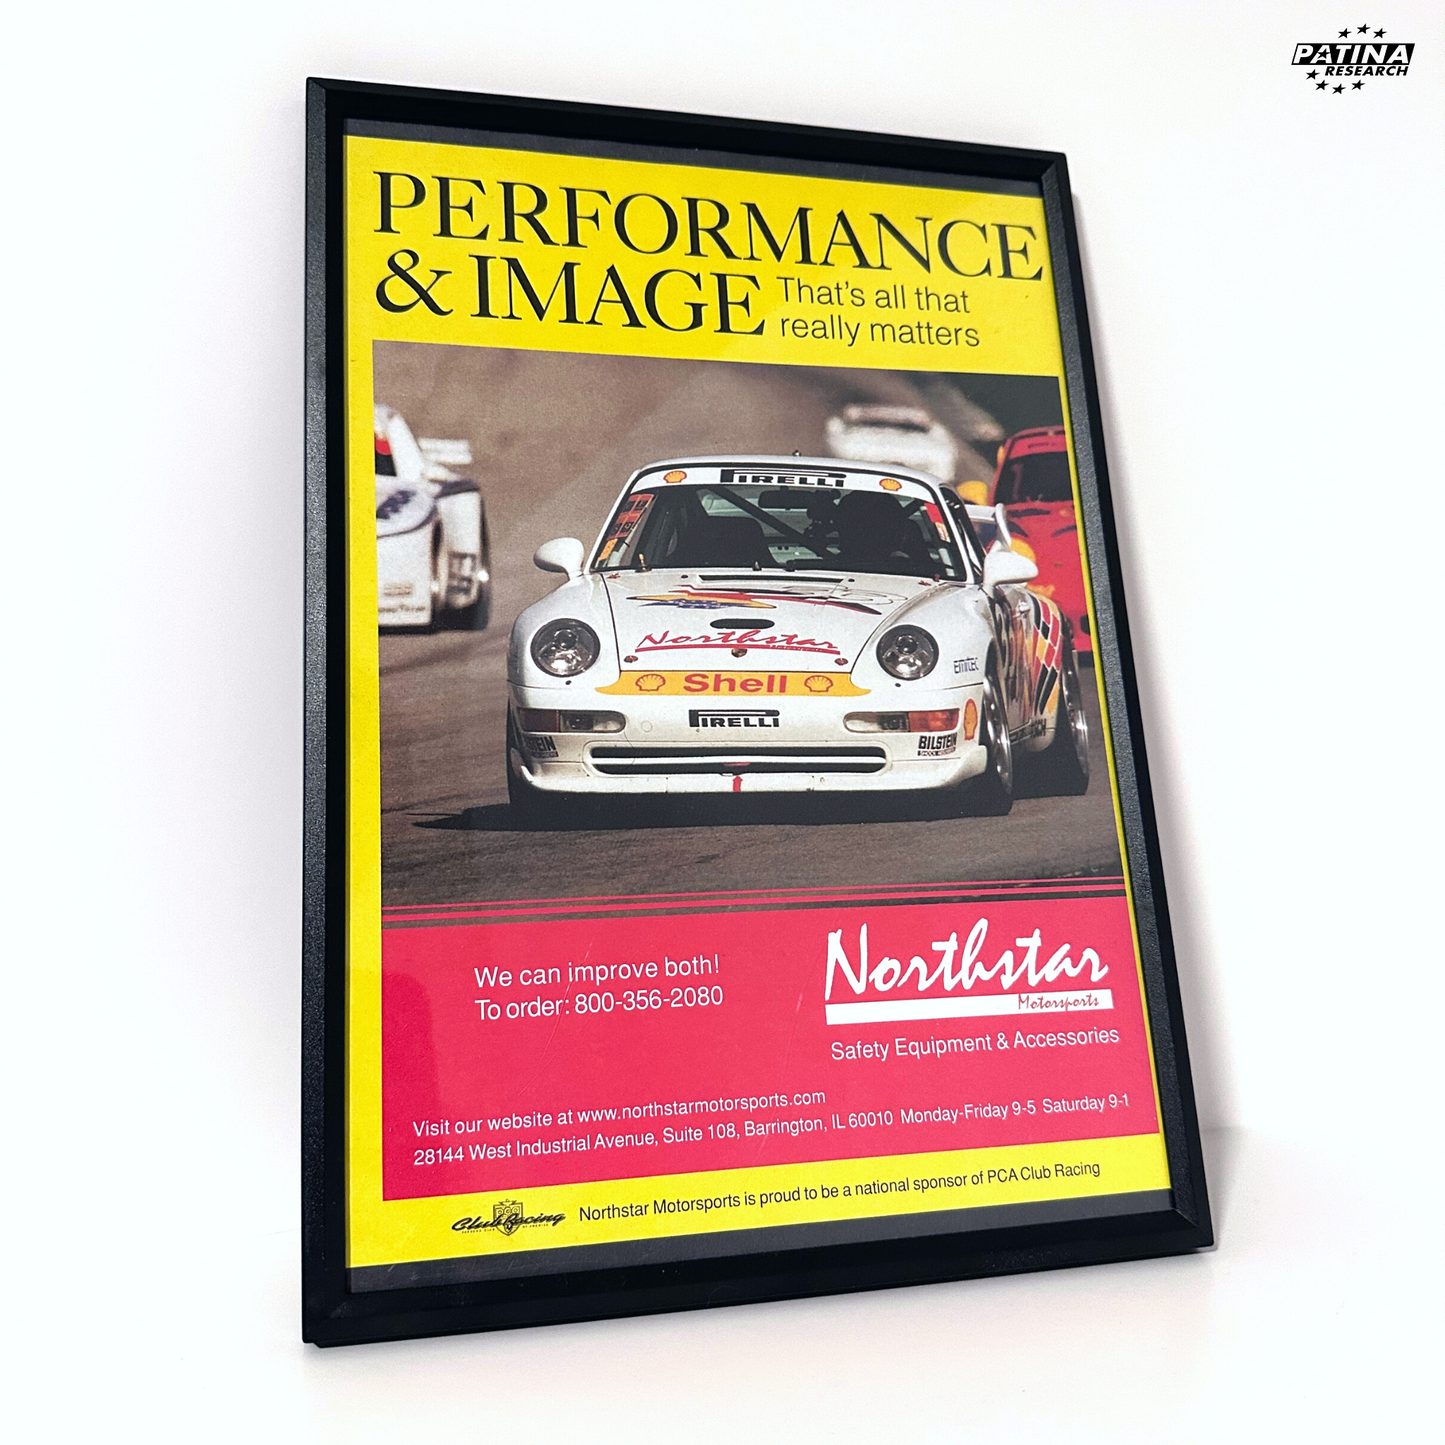 Performance & Image really matters framed ad